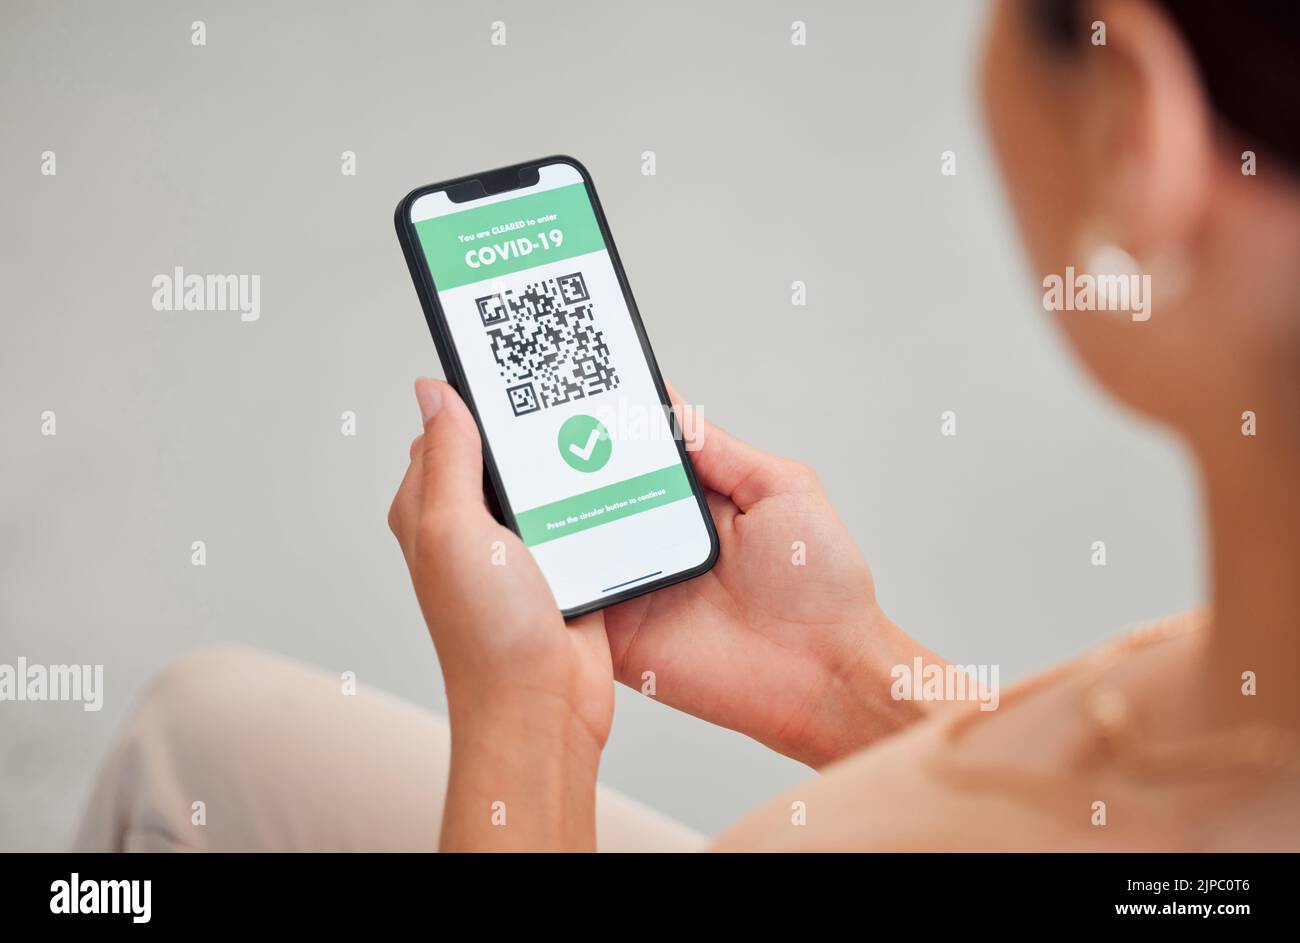 Covid vaccine passport, digital certificate and immunity travel pass displayed with qr code on phone screen for health clearance. Woman, tourist and Stock Photo